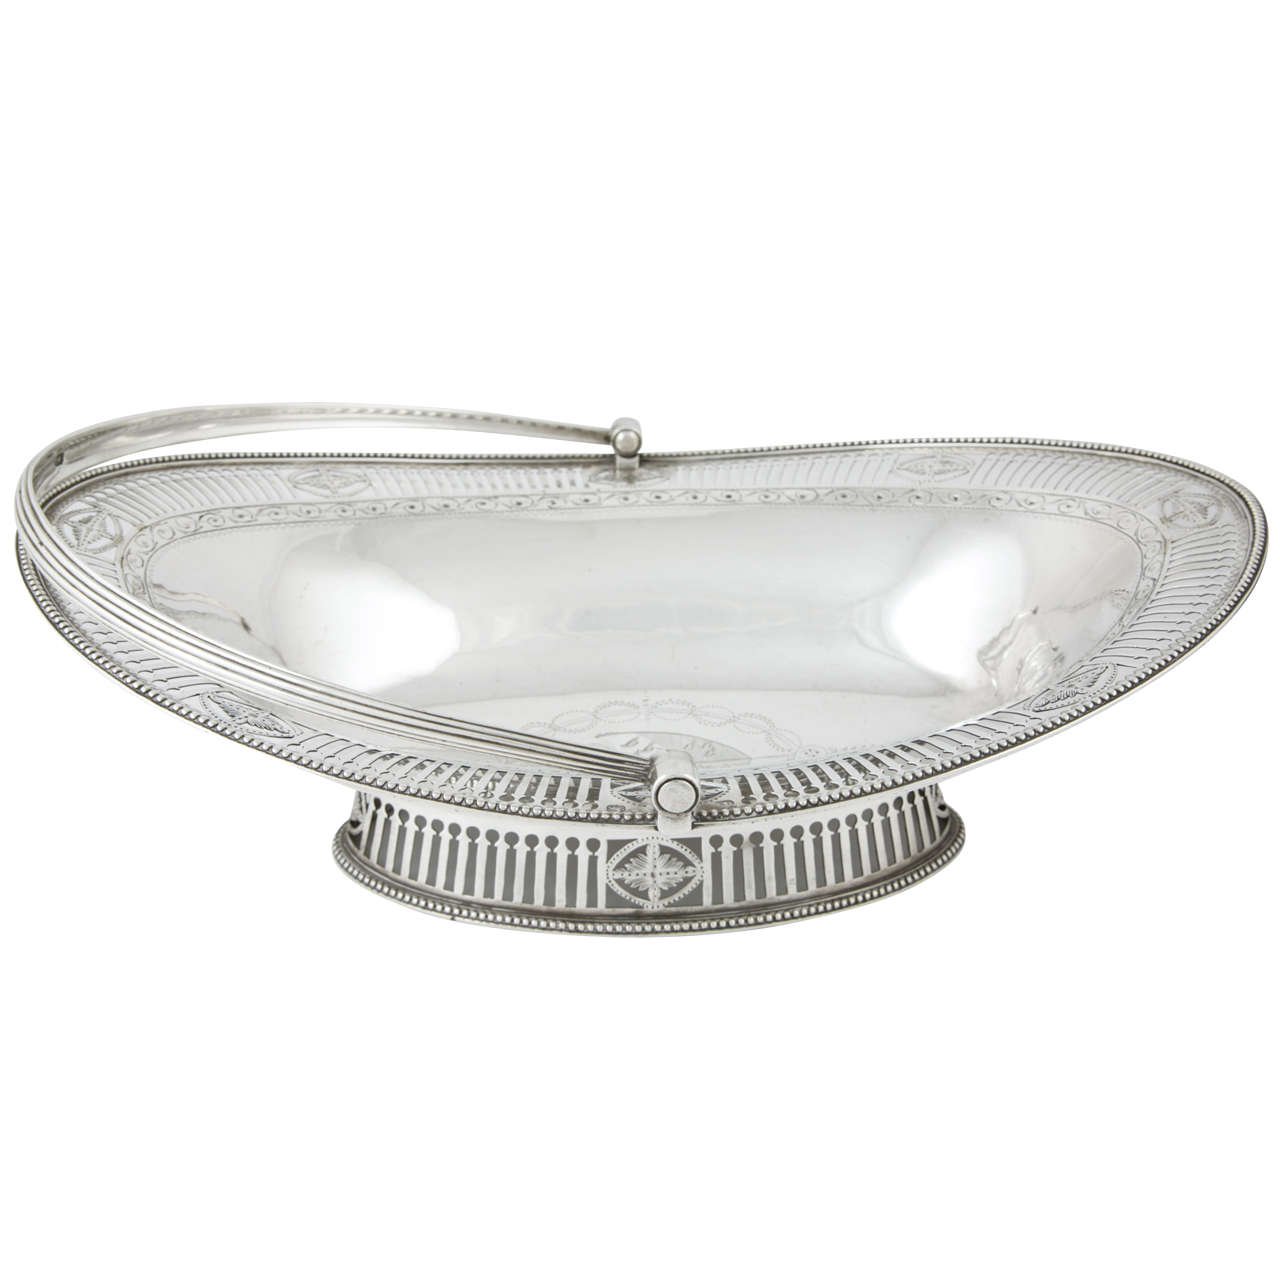 A George III sterling silver cake basket made by Burrage Davenport in London, 1783. The basket is of Classic oval form with bead borders and an engraved pierced gallery and foot. There is also an original coat of arms to the centre. The length of